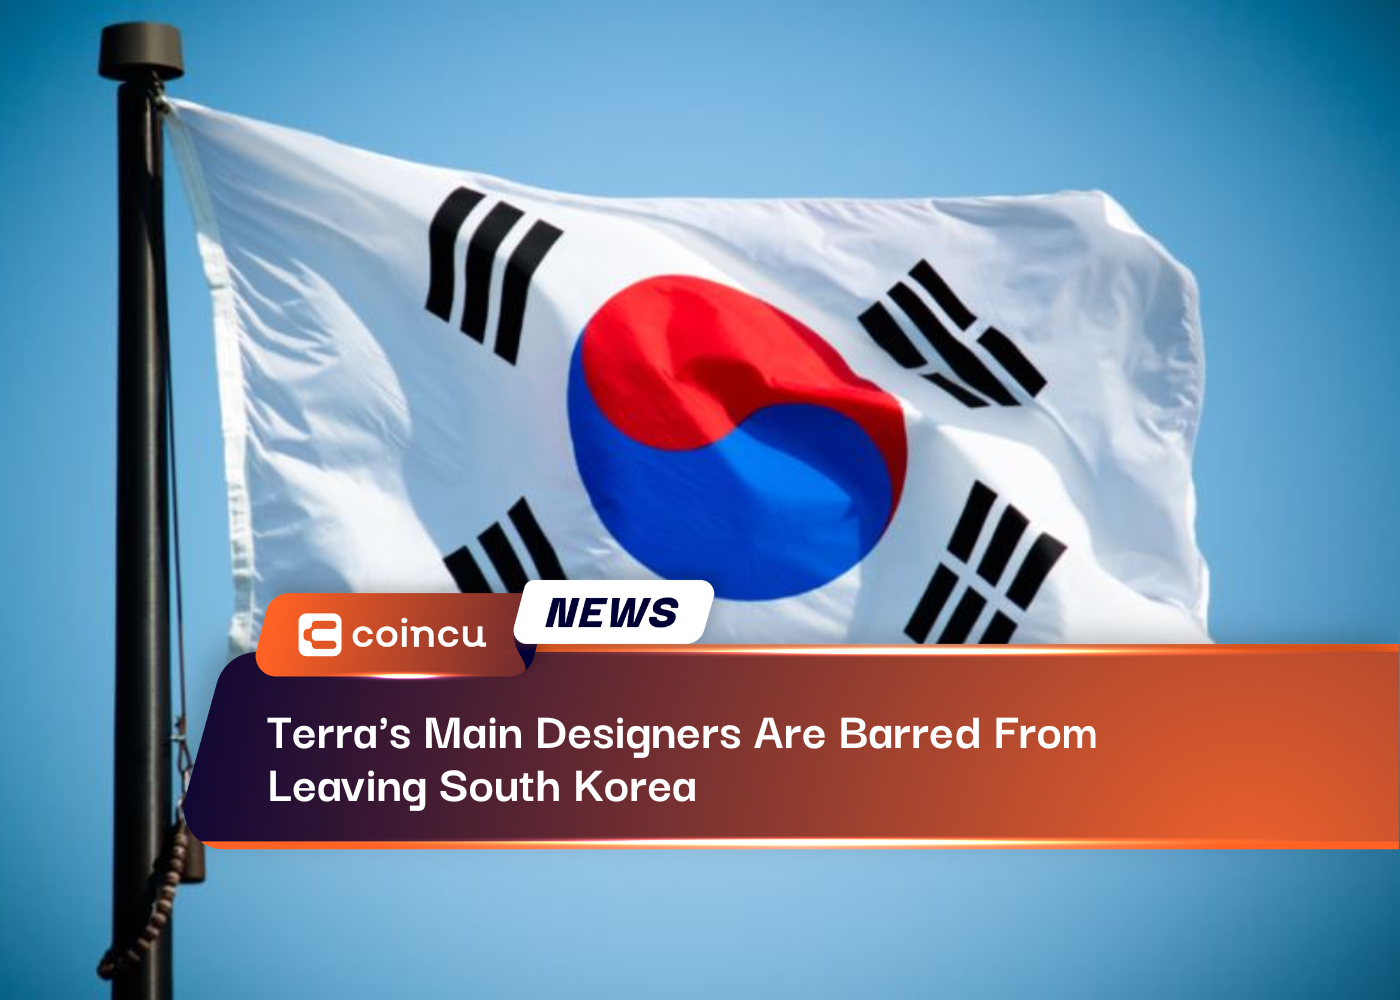 Terra's Main Designers Are Barred From Leaving South Korea